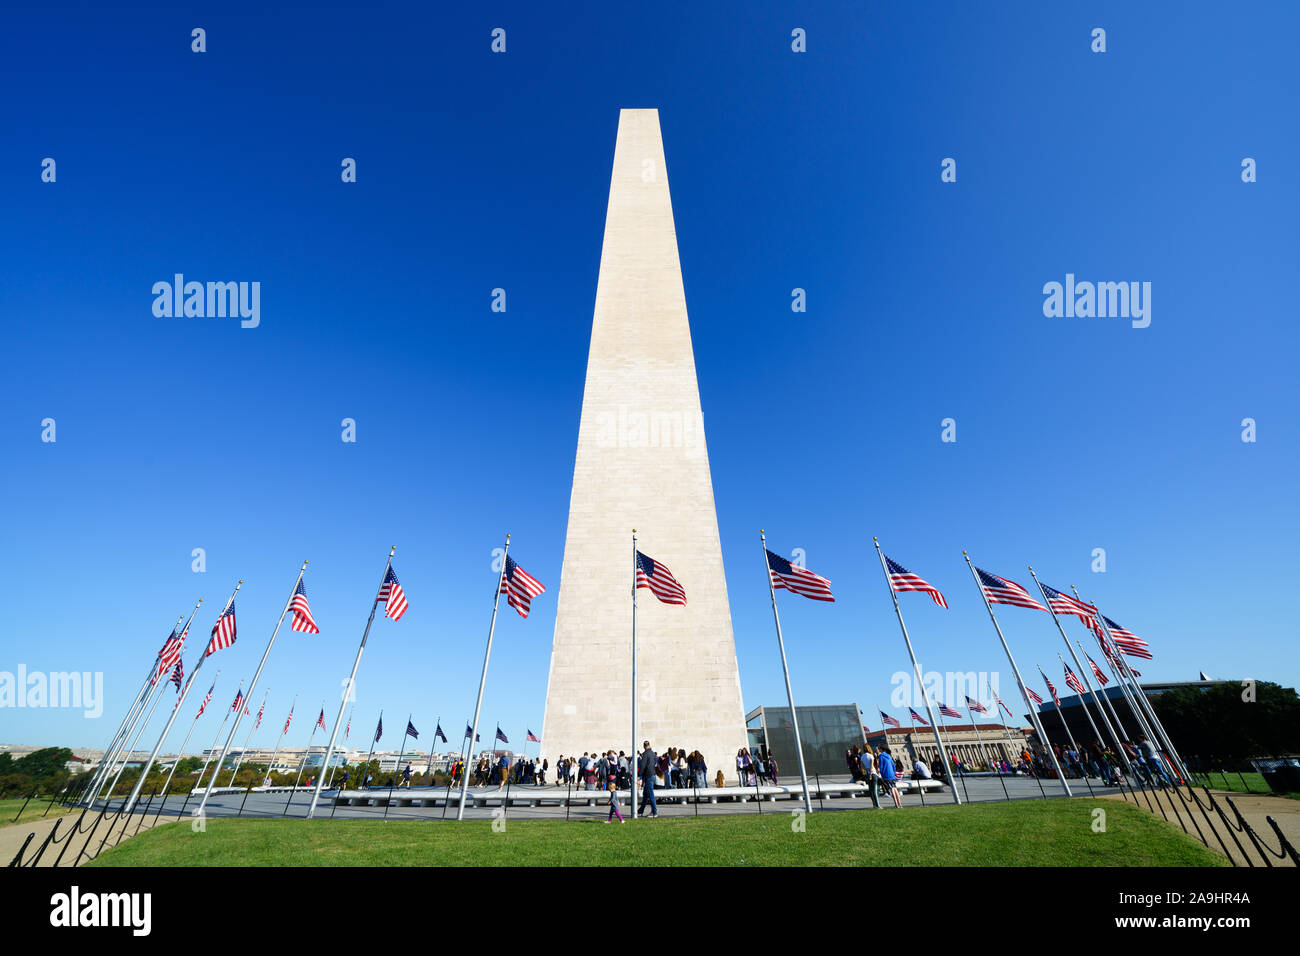 WASHINGTON, DC - The Washington Monument stands in the middle of the National Mall in Washington DC. It commemorates George Washington, the first President of the United States, and at nearly 555 feet (170 meters) tall is the tallest obelisk in the world. Stock Photo